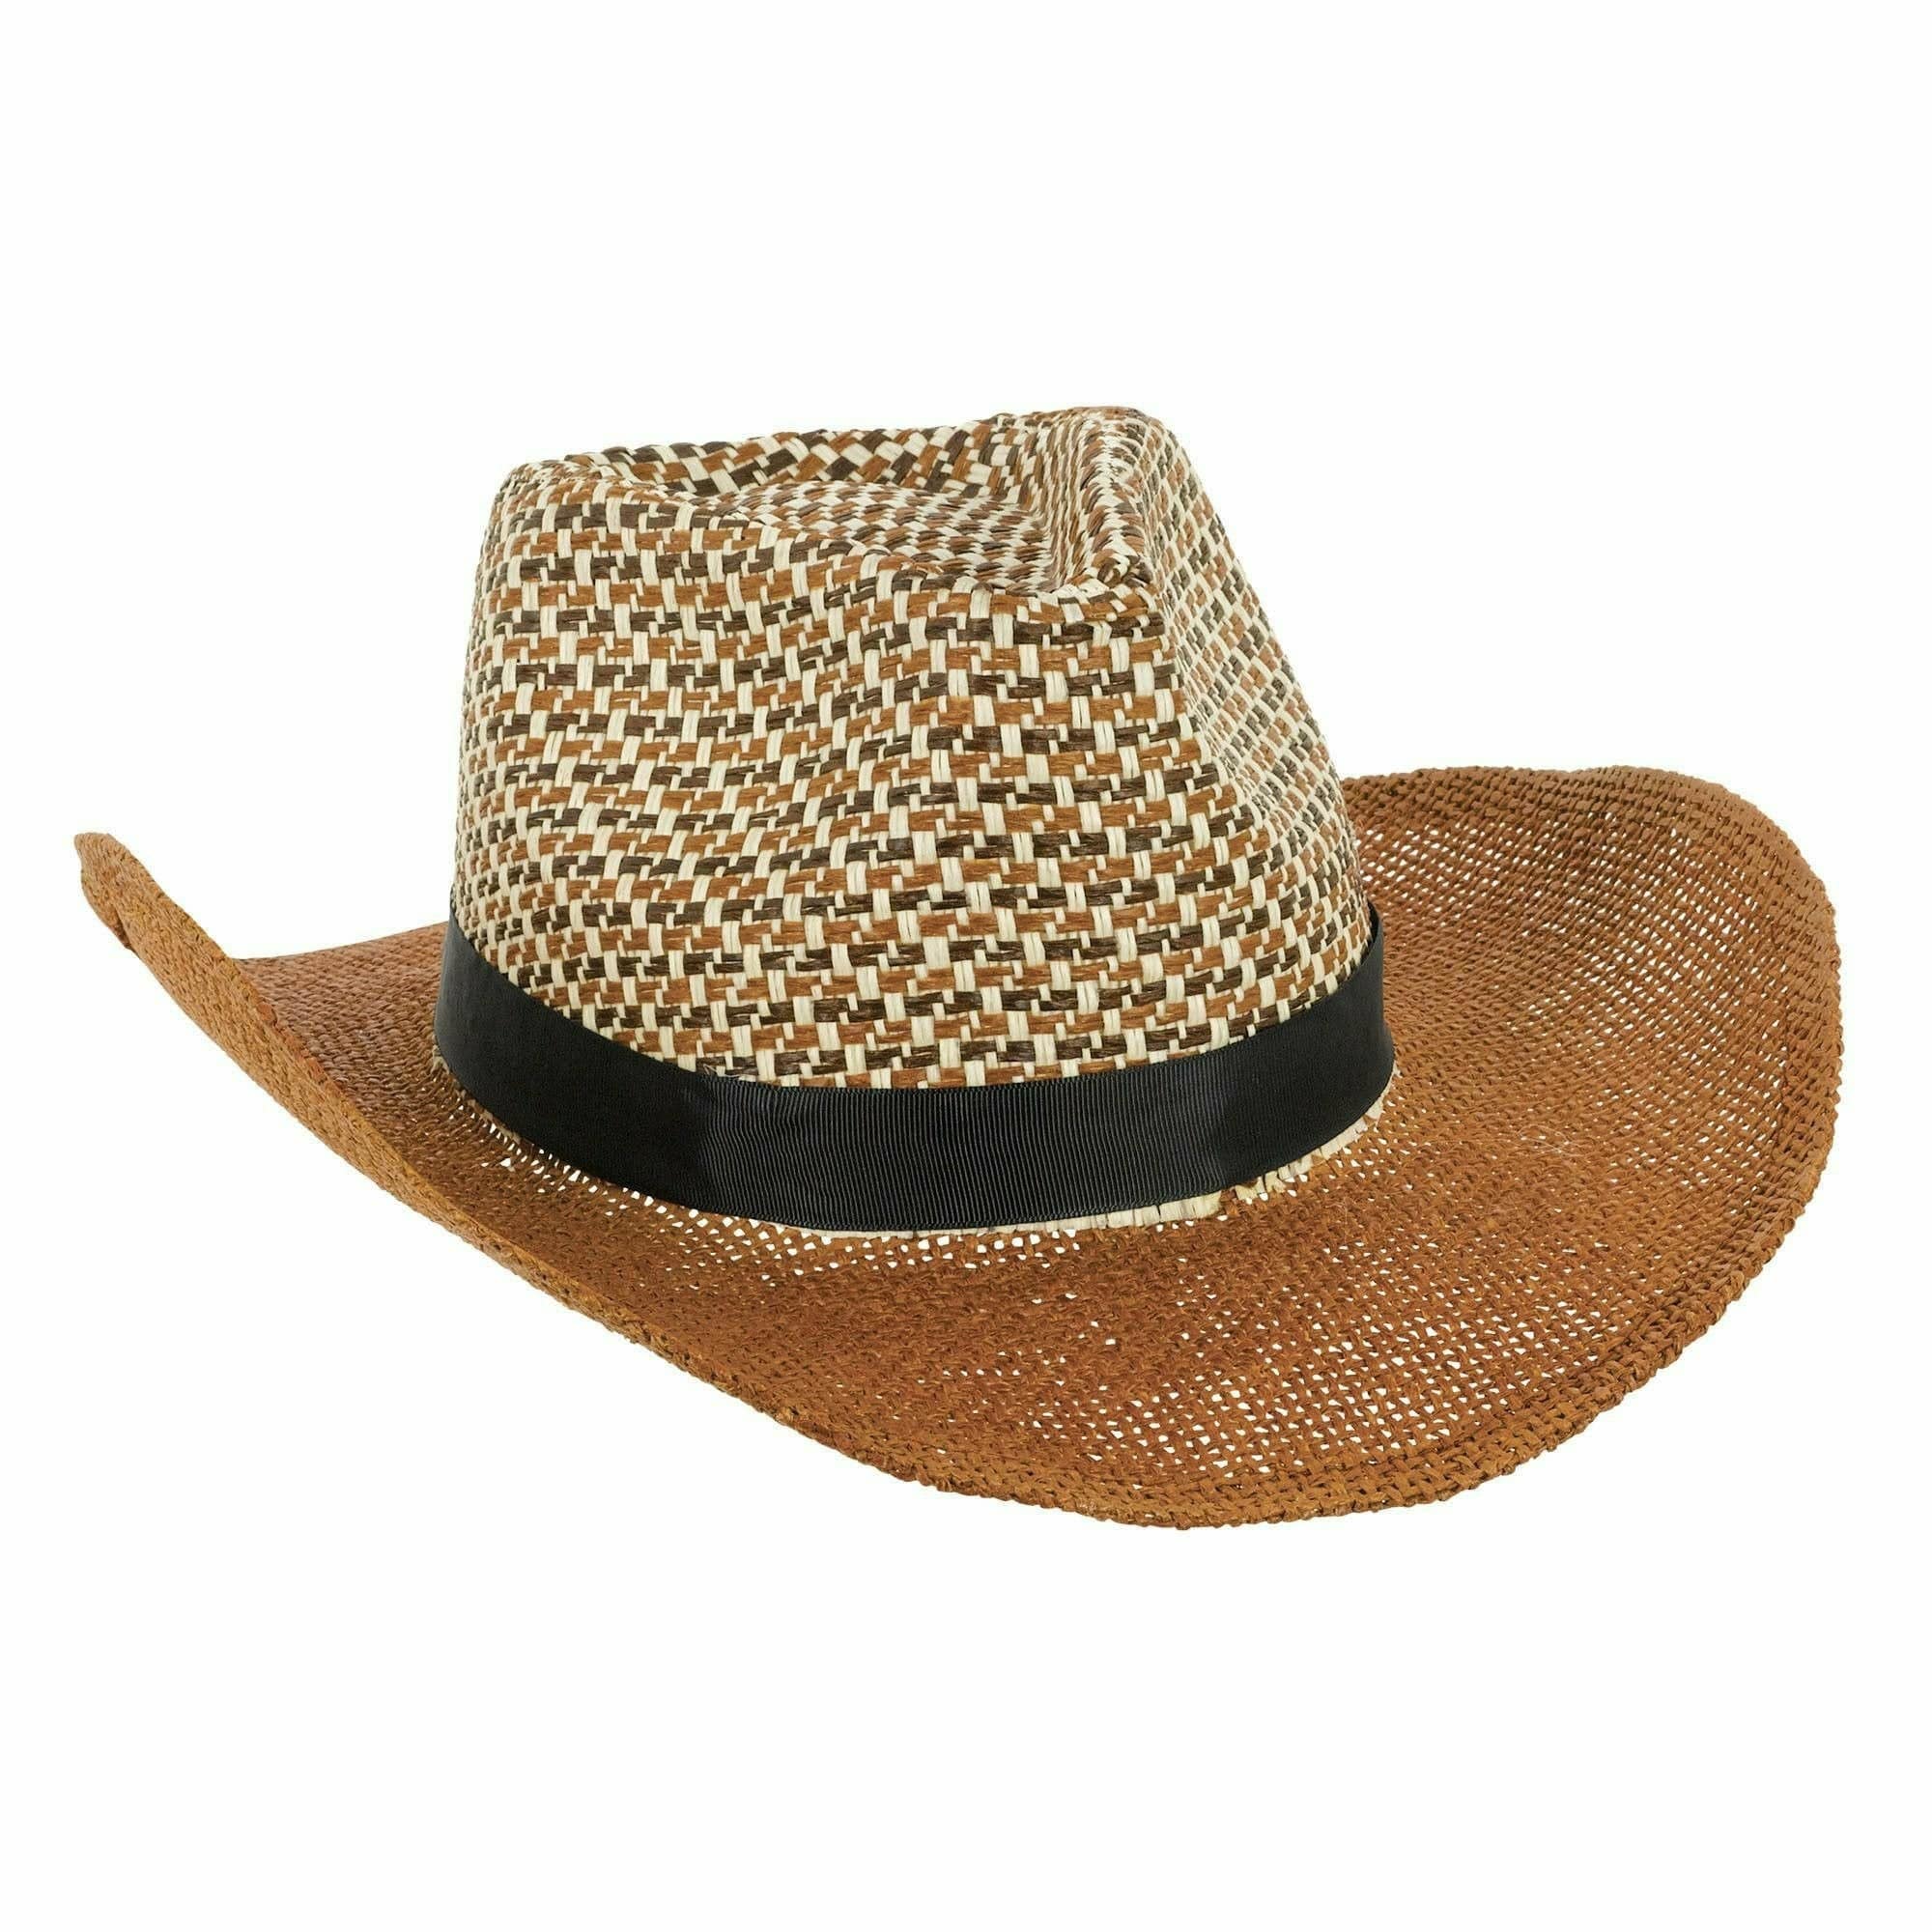 Amscan COSTUMES: HATS Two-Toned Cowboy Hat